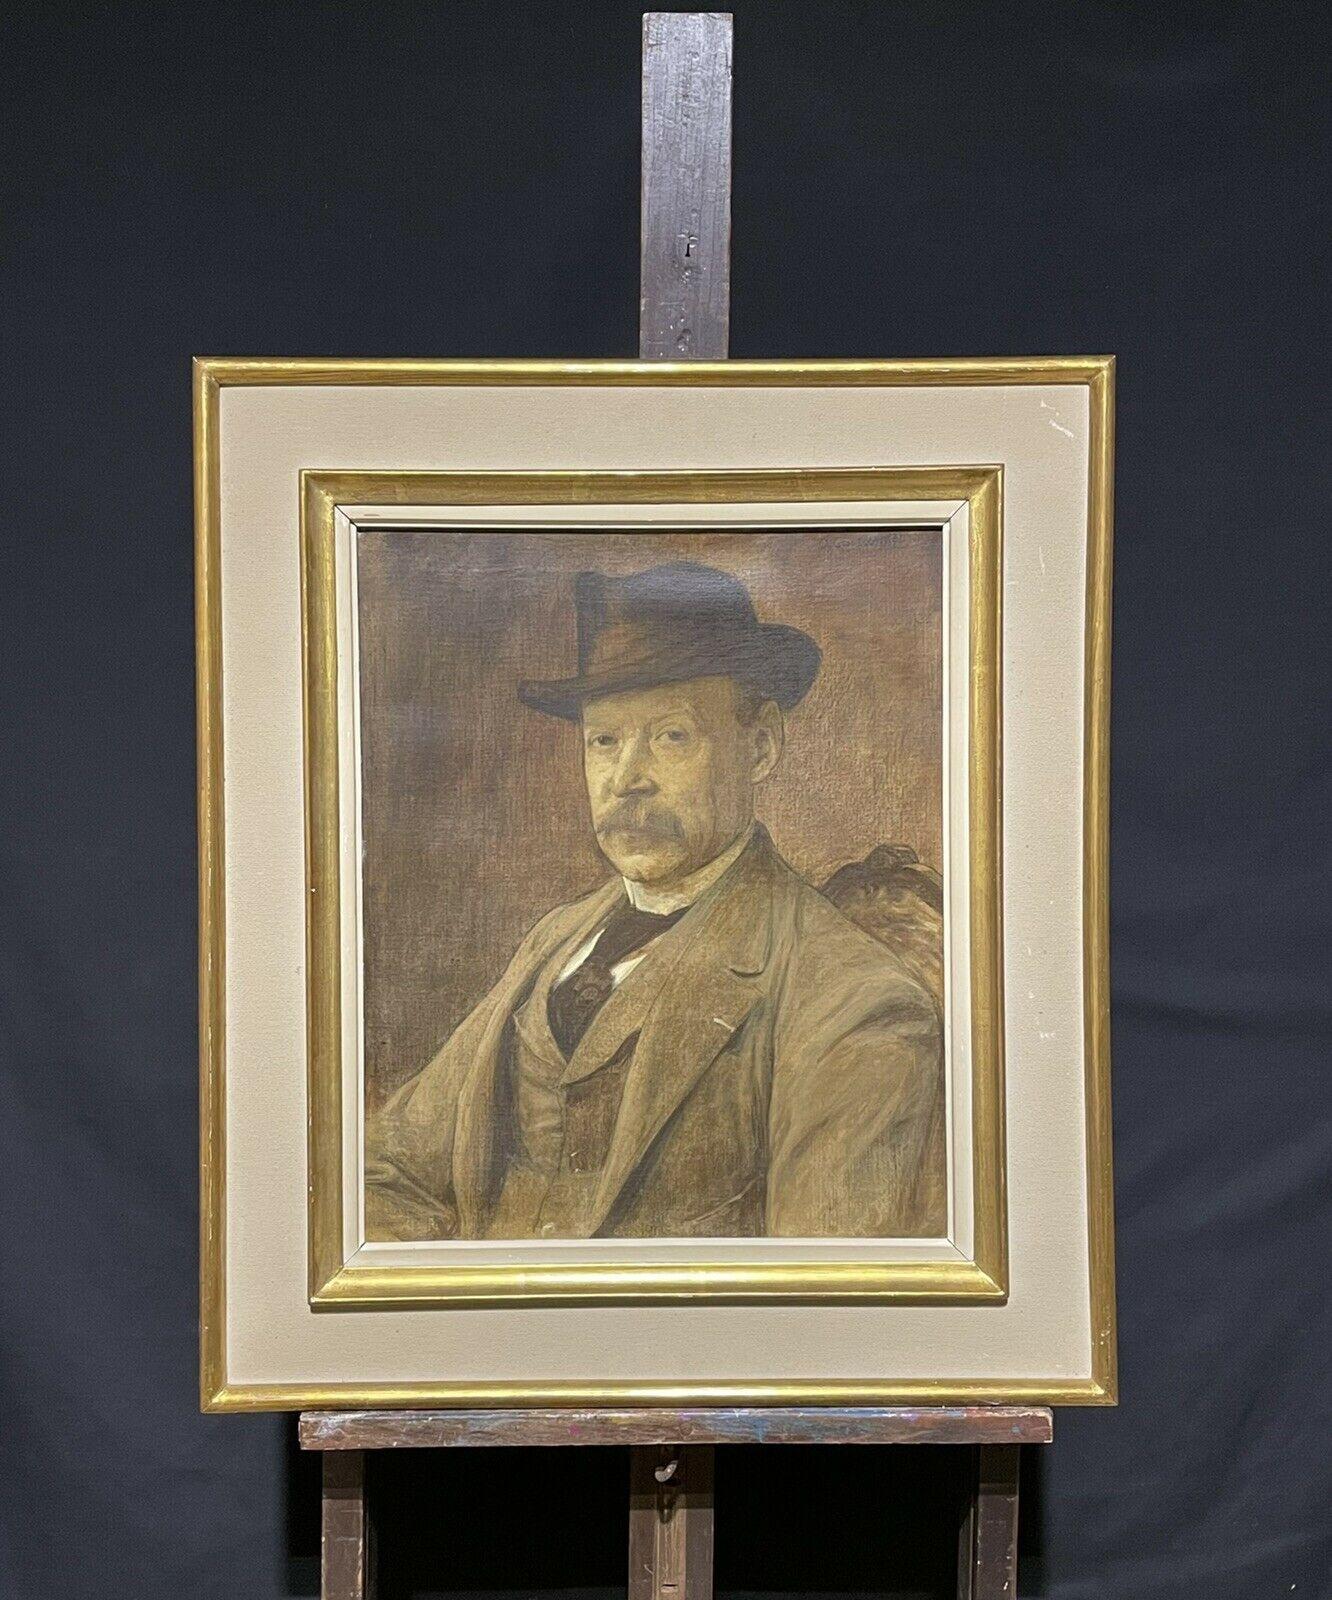 ANTIQUE FRENCH IMPRESSIONIST OIL PAINTING - PORTRAIT OF SEATED MAN IN HAT - Painting by Unknown